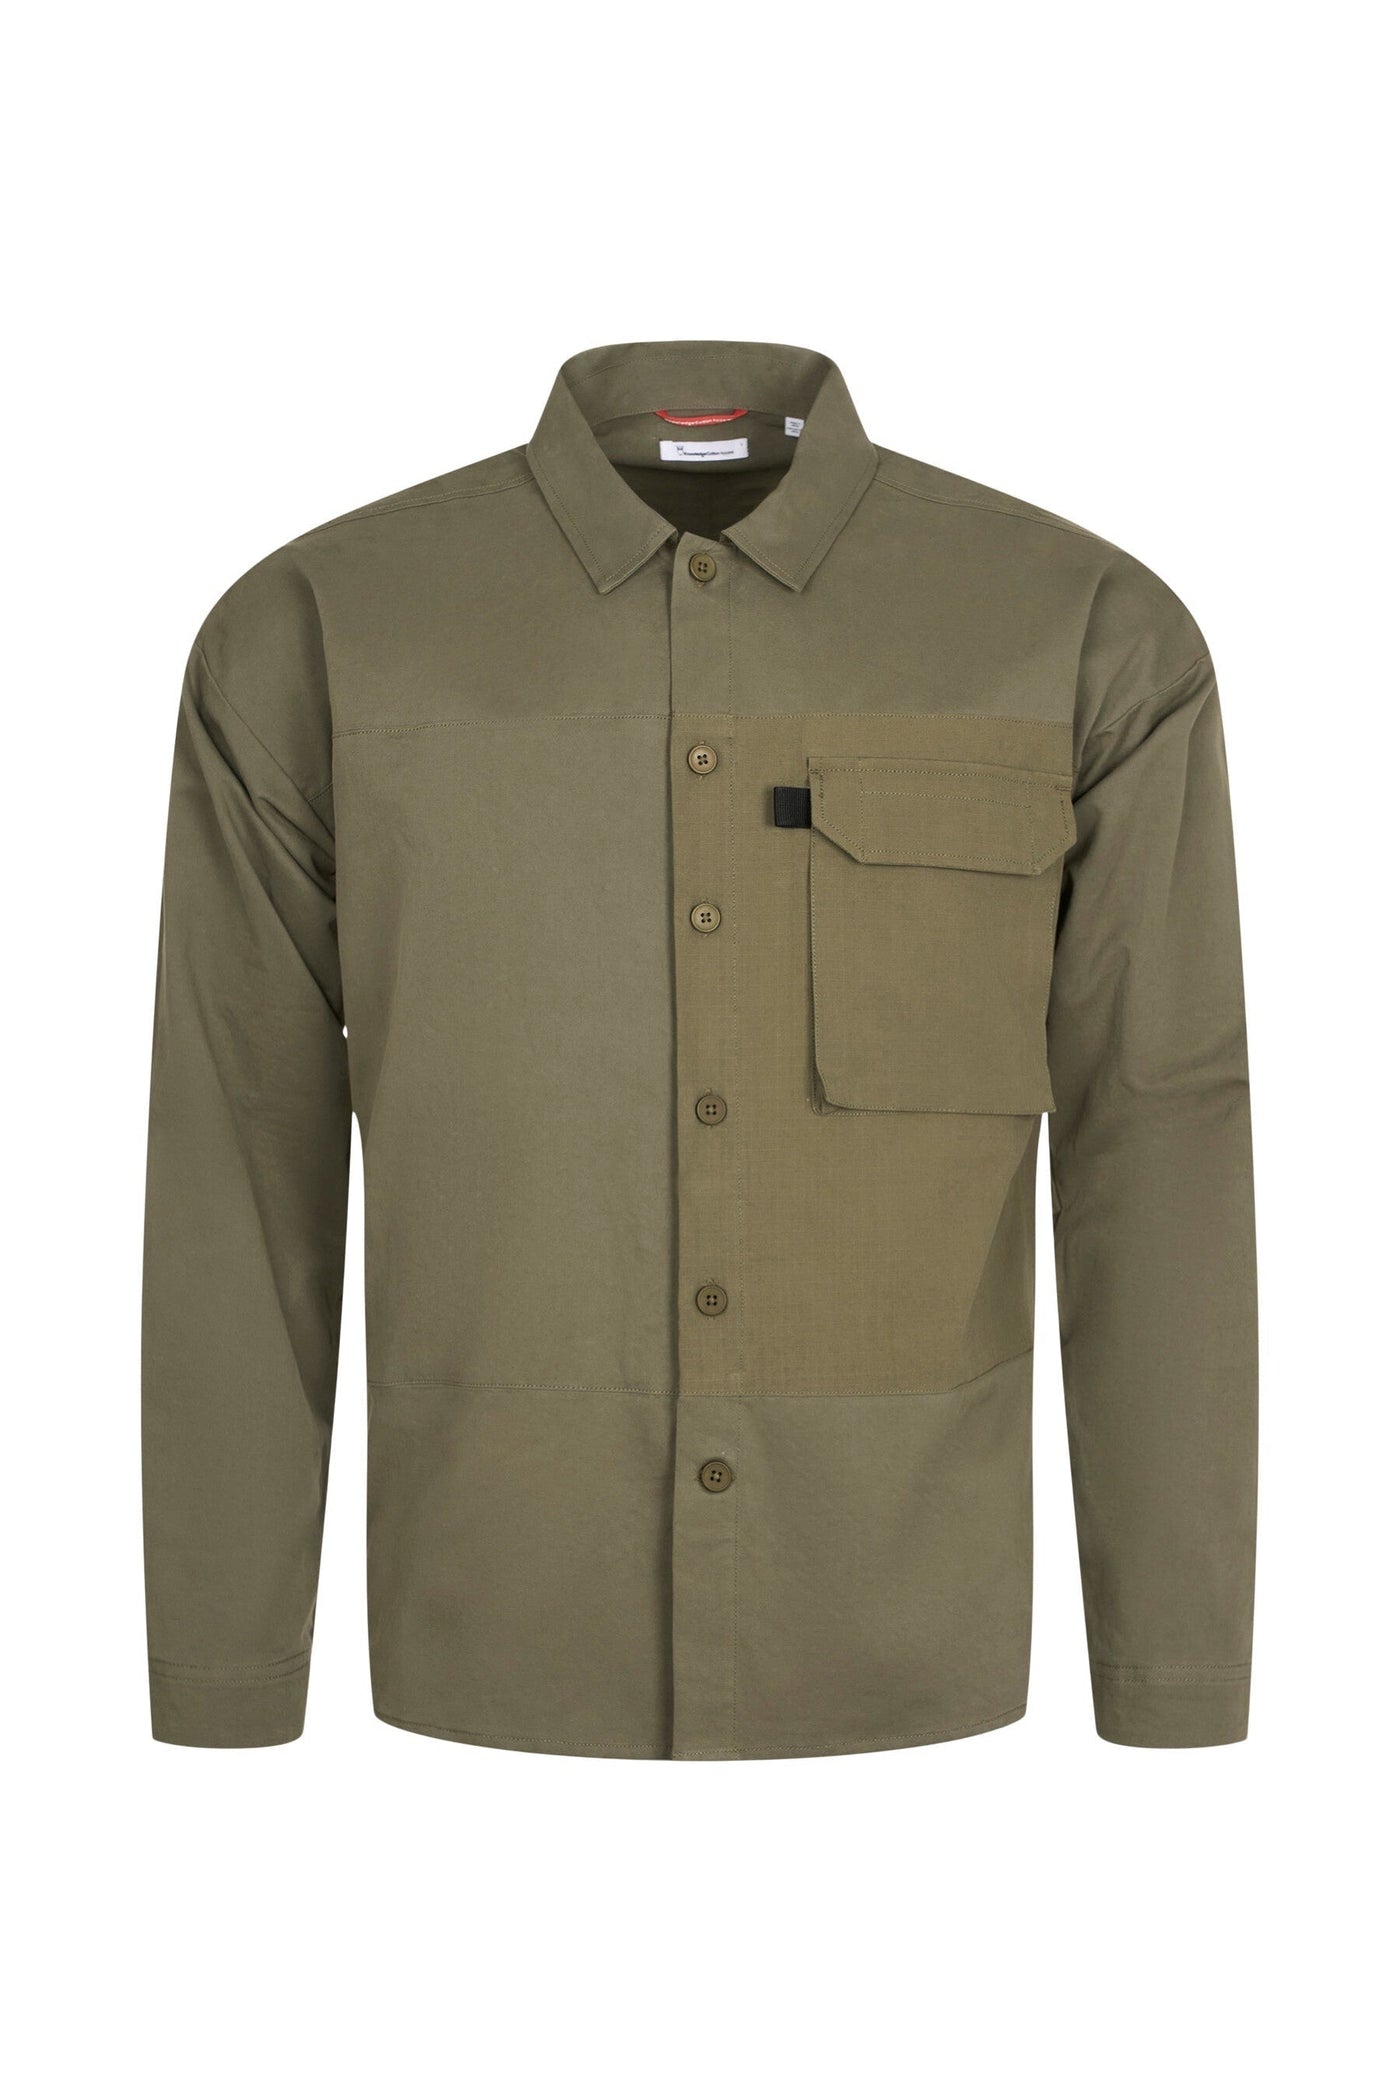 Knowledge Cotton Outdoor Twill Overshirt with contrast Fabric in Burned Olive - GOTS/Vegan-Mens-Ohh! By Gum - Shop Sustainable